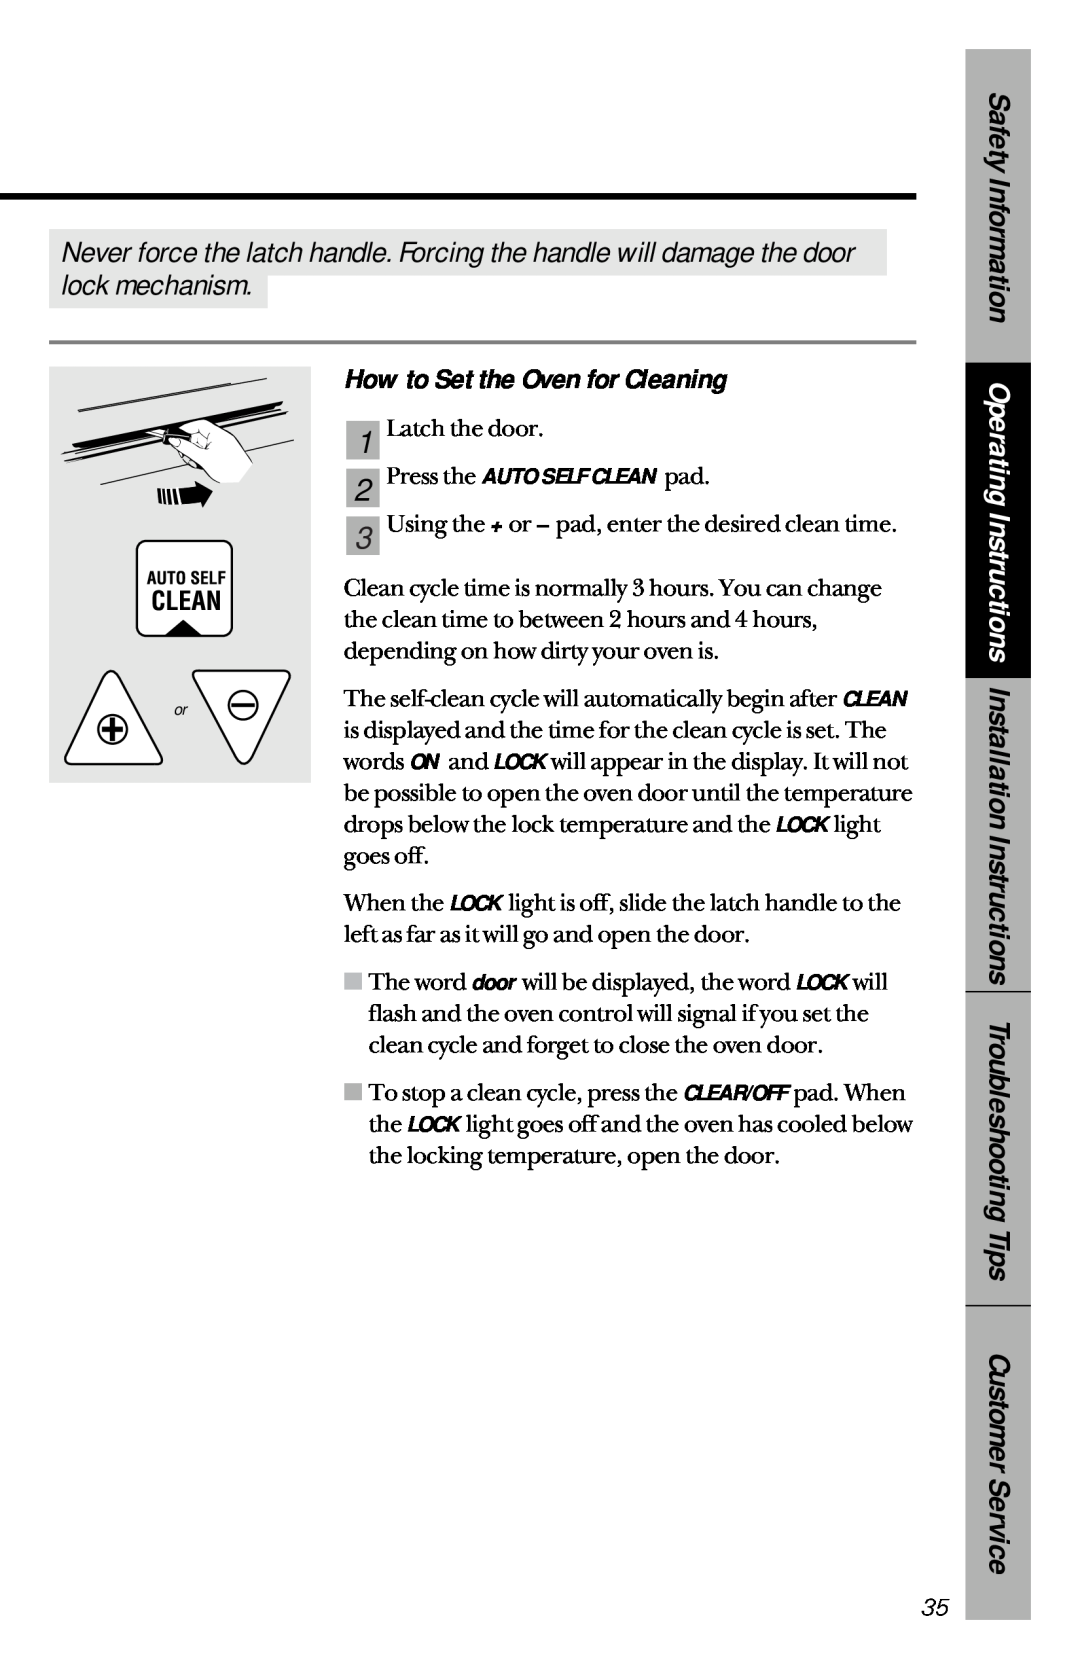 GE 164D3333P033, 49-8779 manual How to Set the Oven for Cleaning, Press the AUTO SELF CLEAN pad 